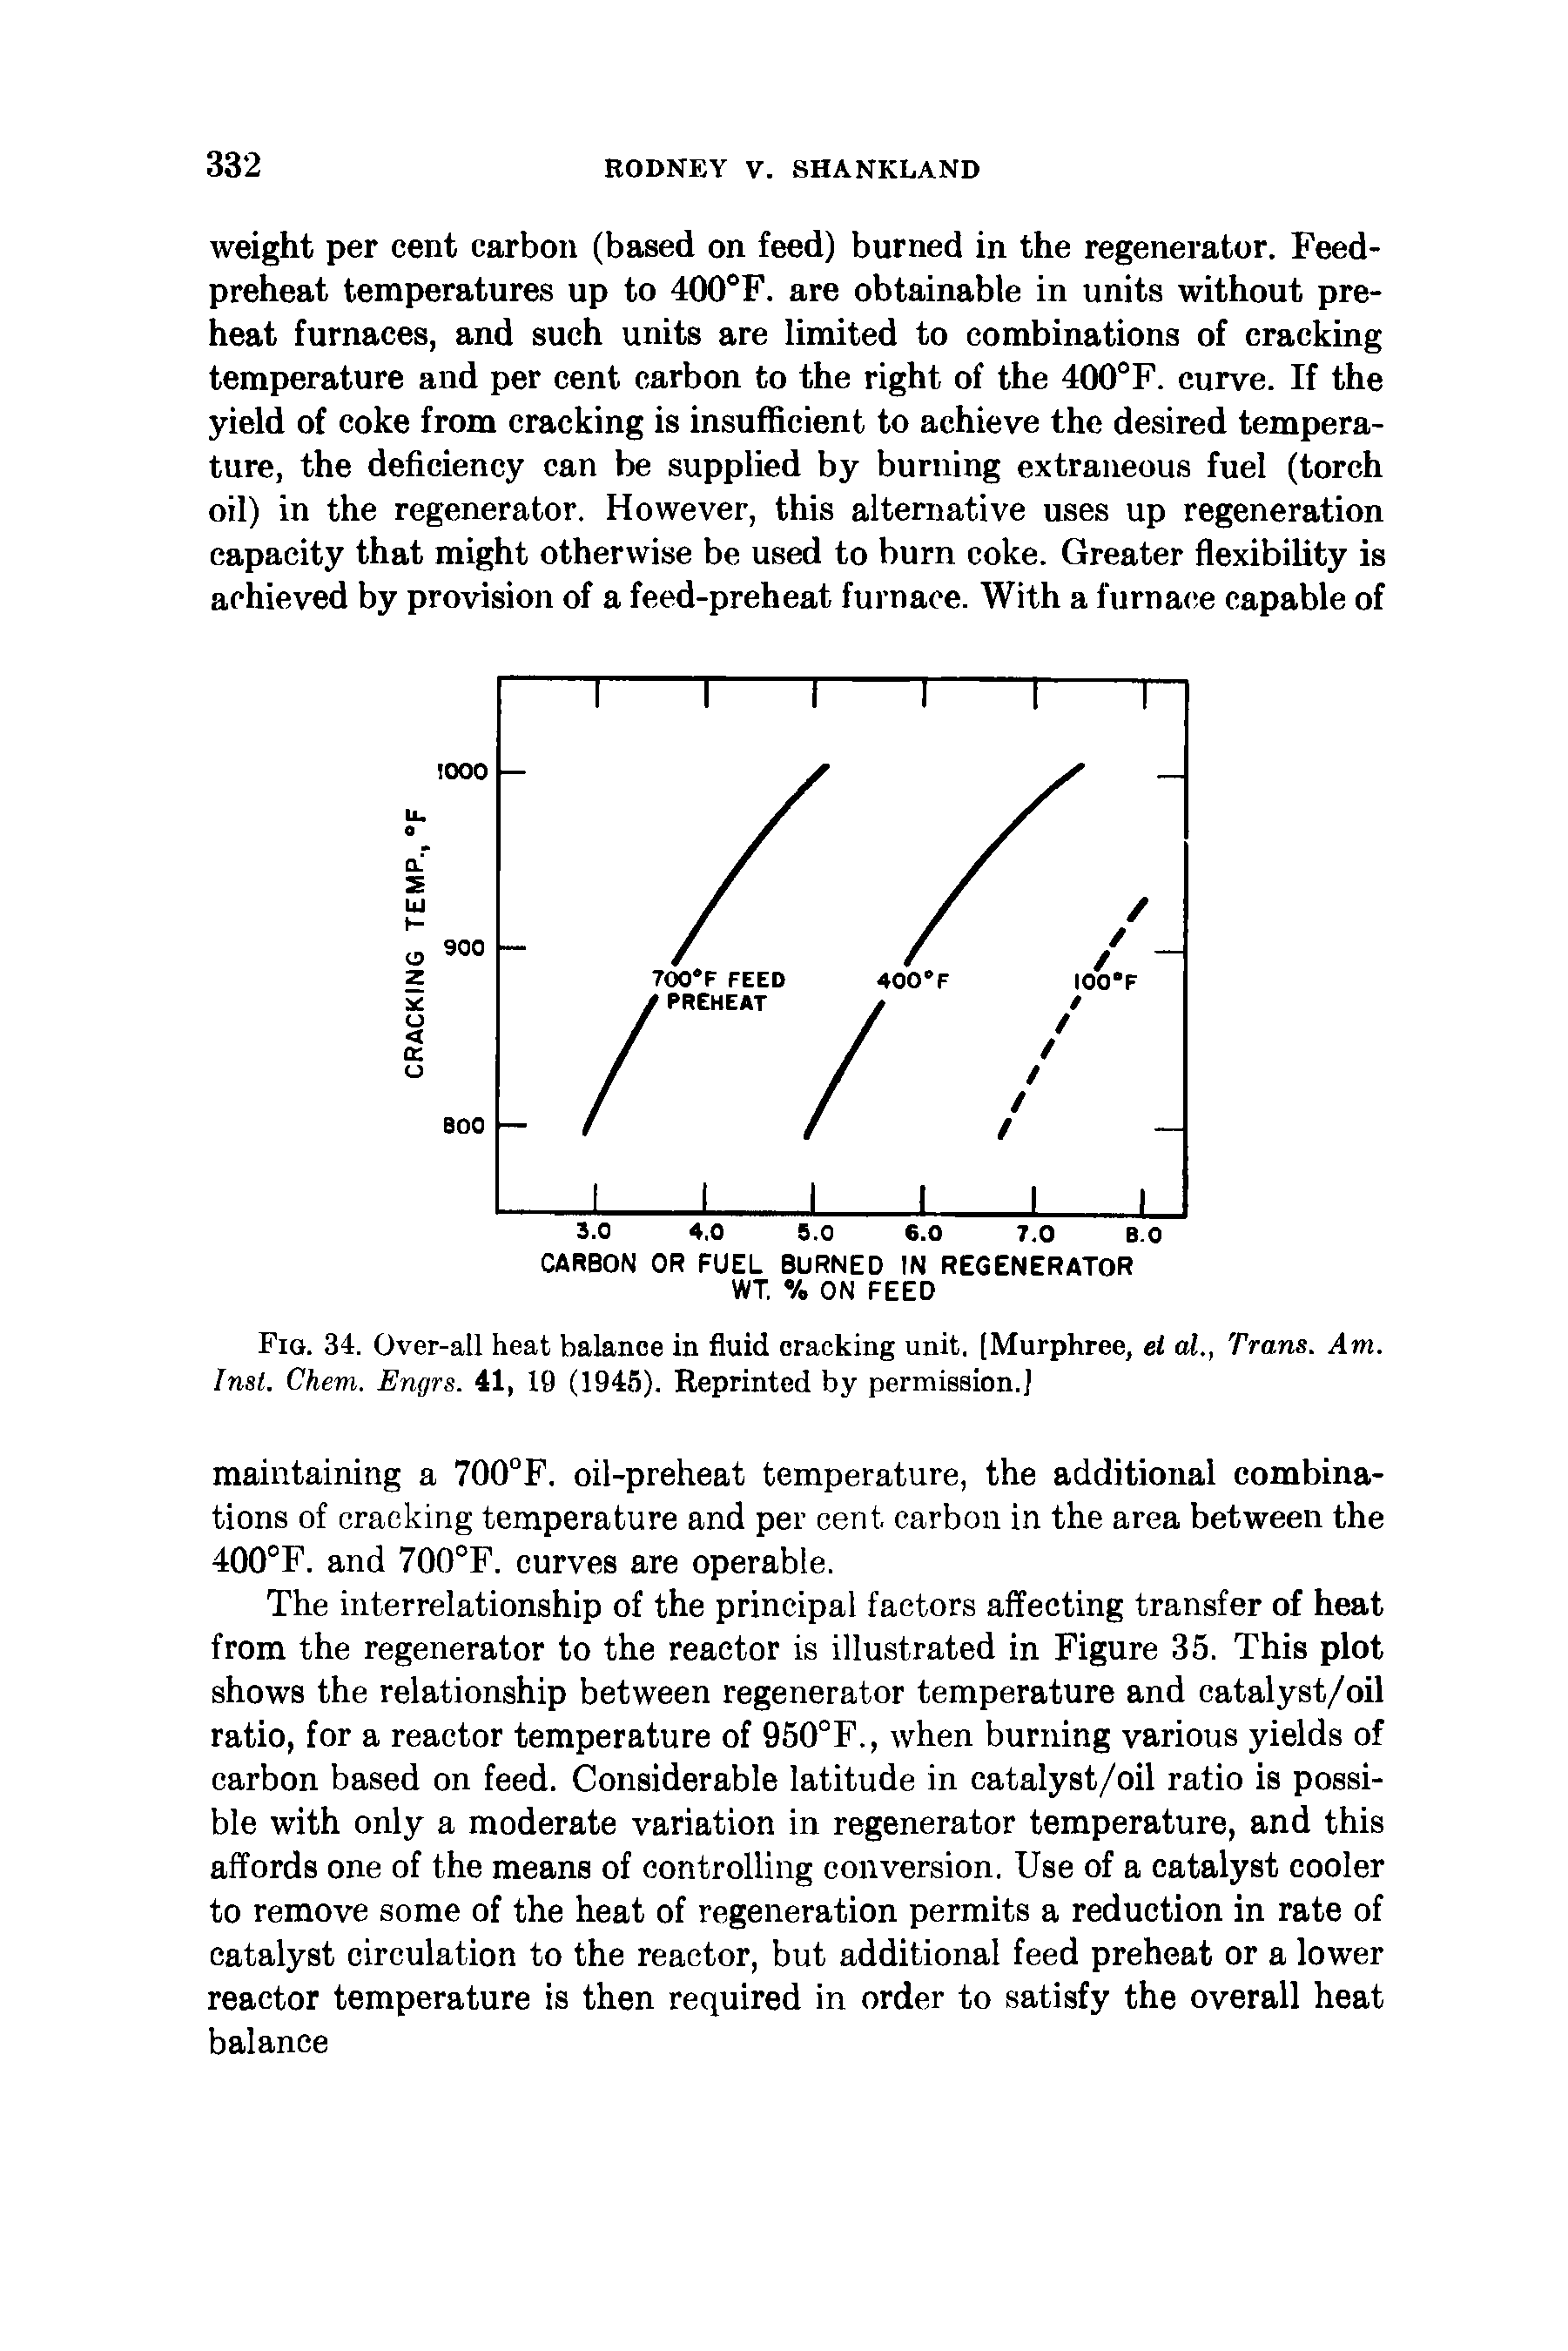 Fig. 34. Over-all heat balance in fluid cracking unit. [Murphree, et al., Trans. Am. Inst. Ckem. Engrs. 41, 19 (1945). Reprinted by permission.]...